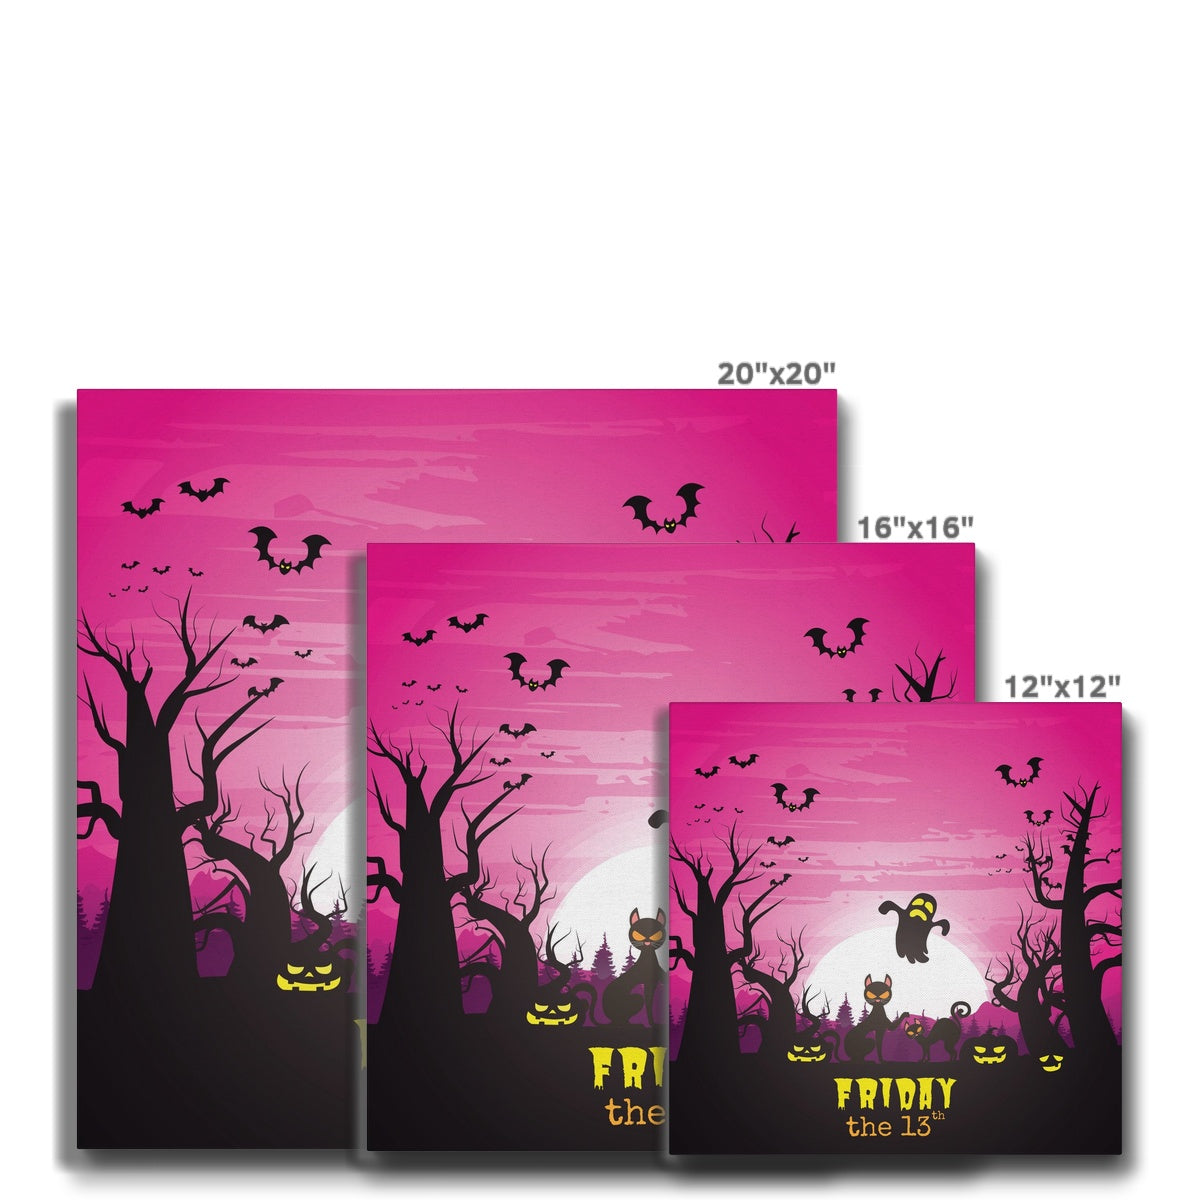 Spooky Friday The 13th Art Canvas